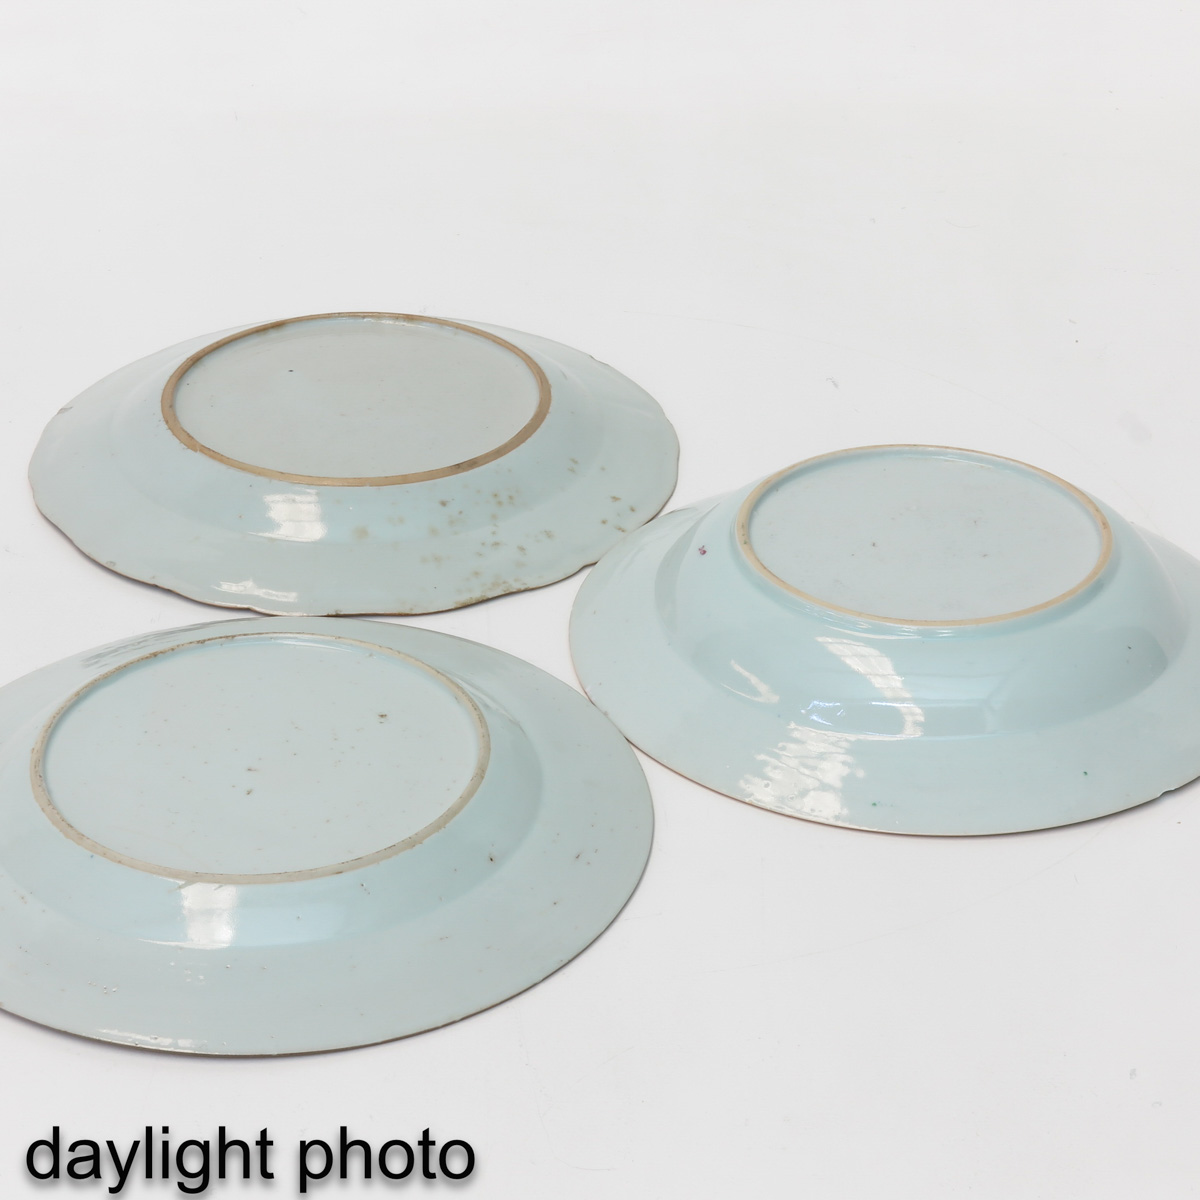 A Series of 10 Famille Rose Plates - Image 10 of 10